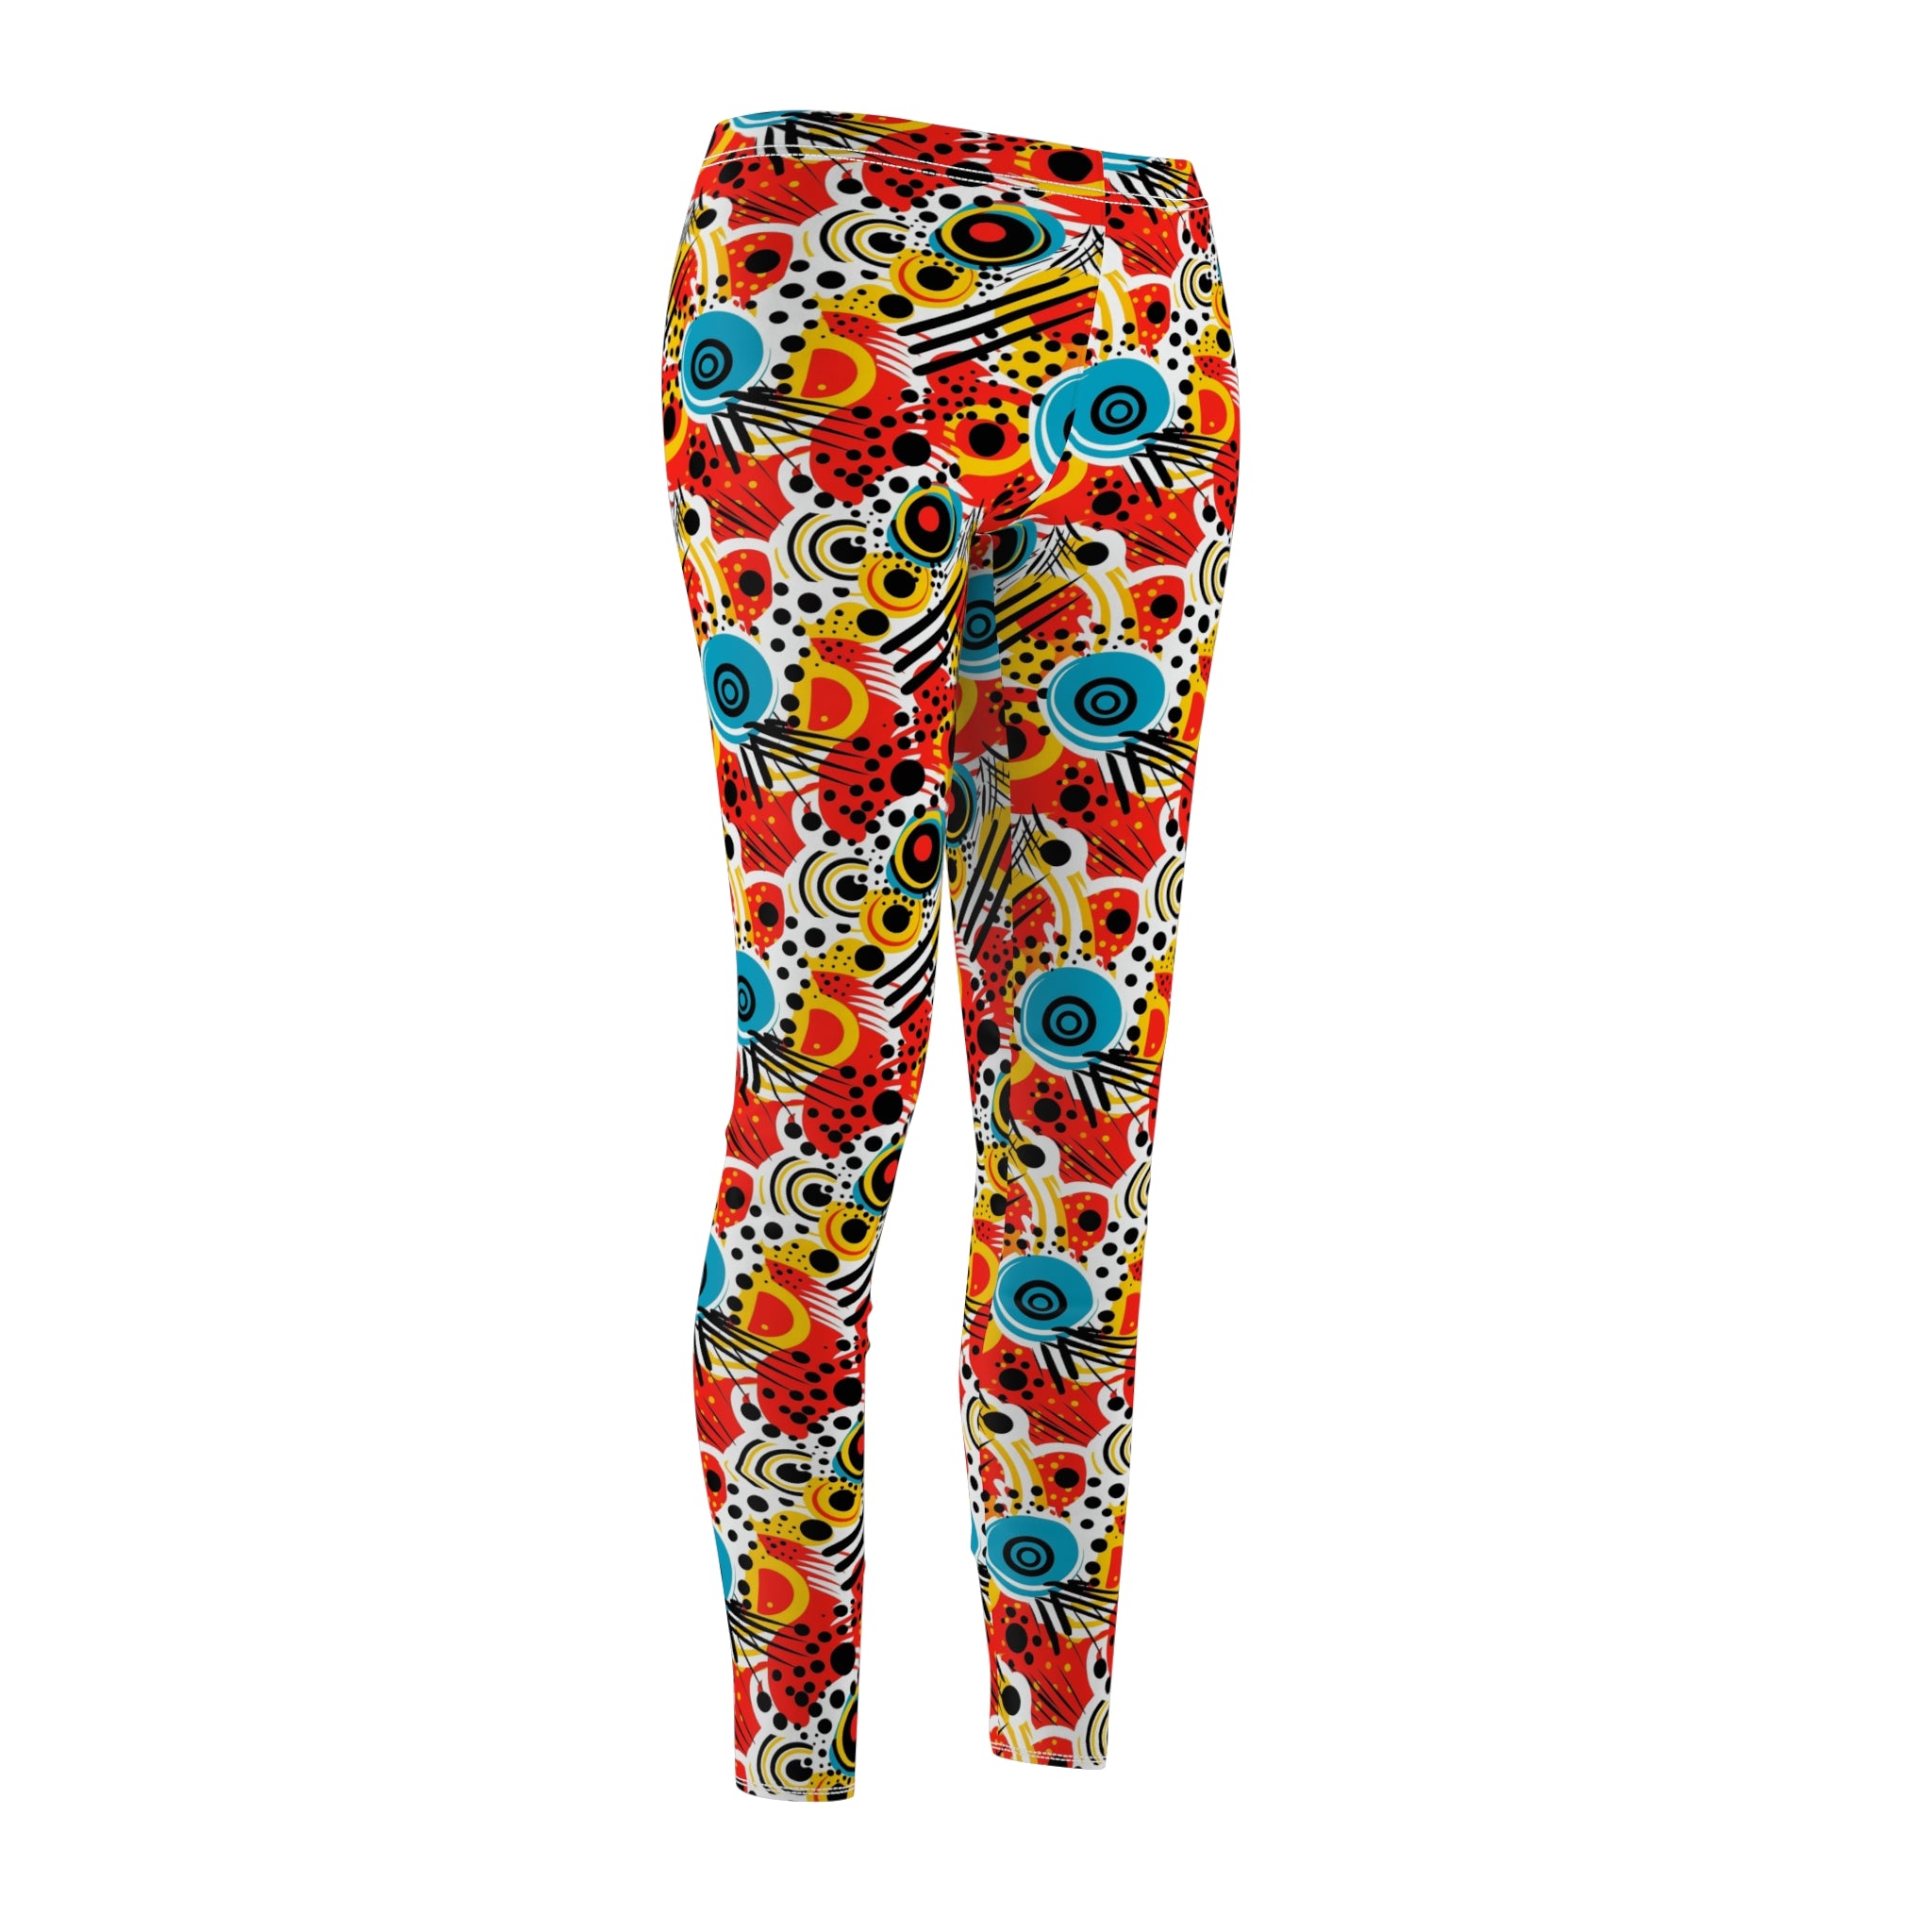 Pop Art Colorful Gym Leggings for Women XS-2XL - Vibrant & Supportive